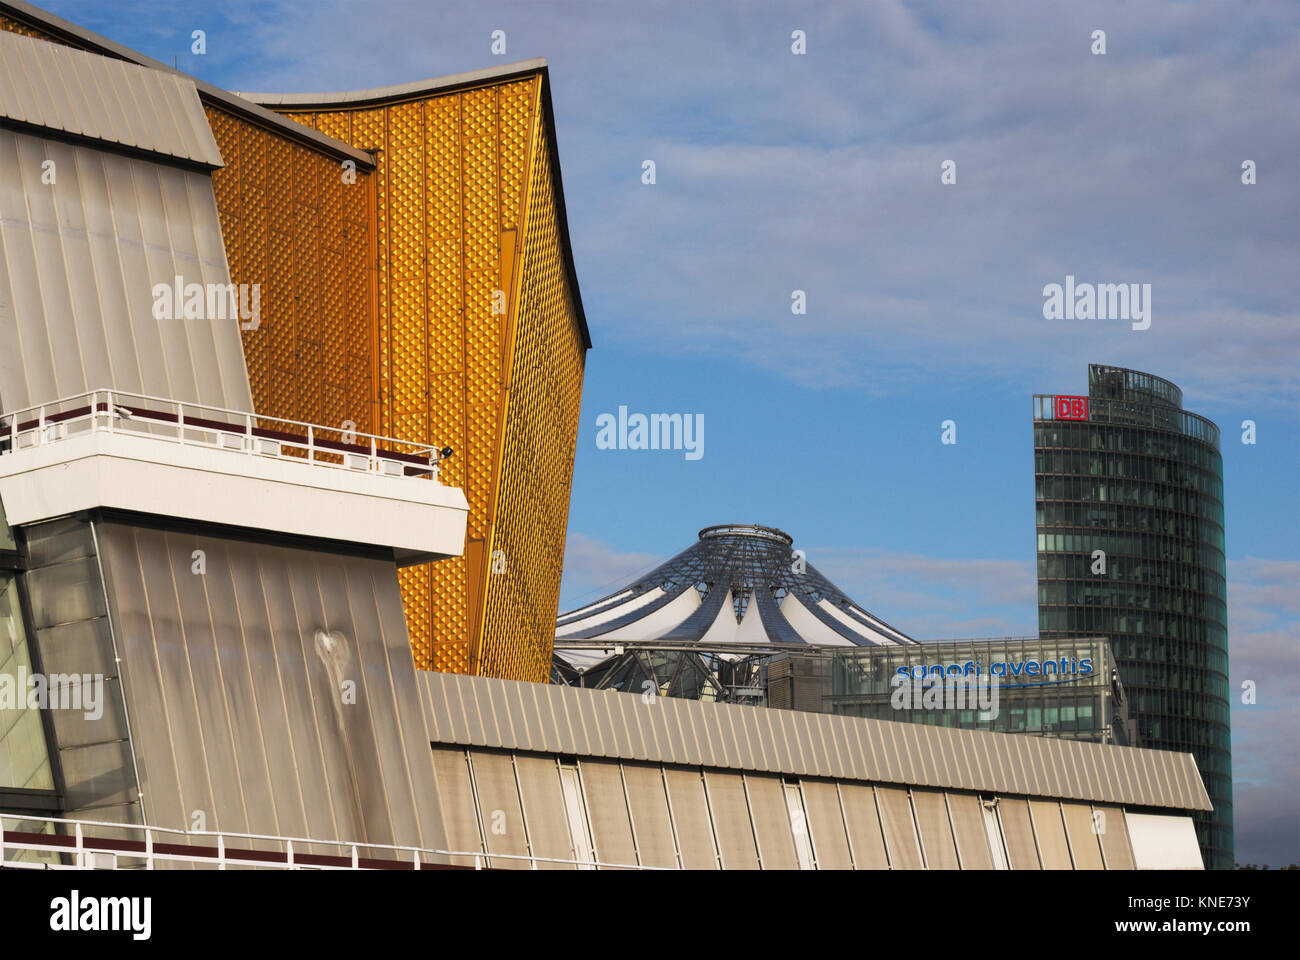 The Berliner Philharmonie theatre, seat of the Berlin Philarmonic Orchestra and the DB tower in the background, Berlin Stock Photo